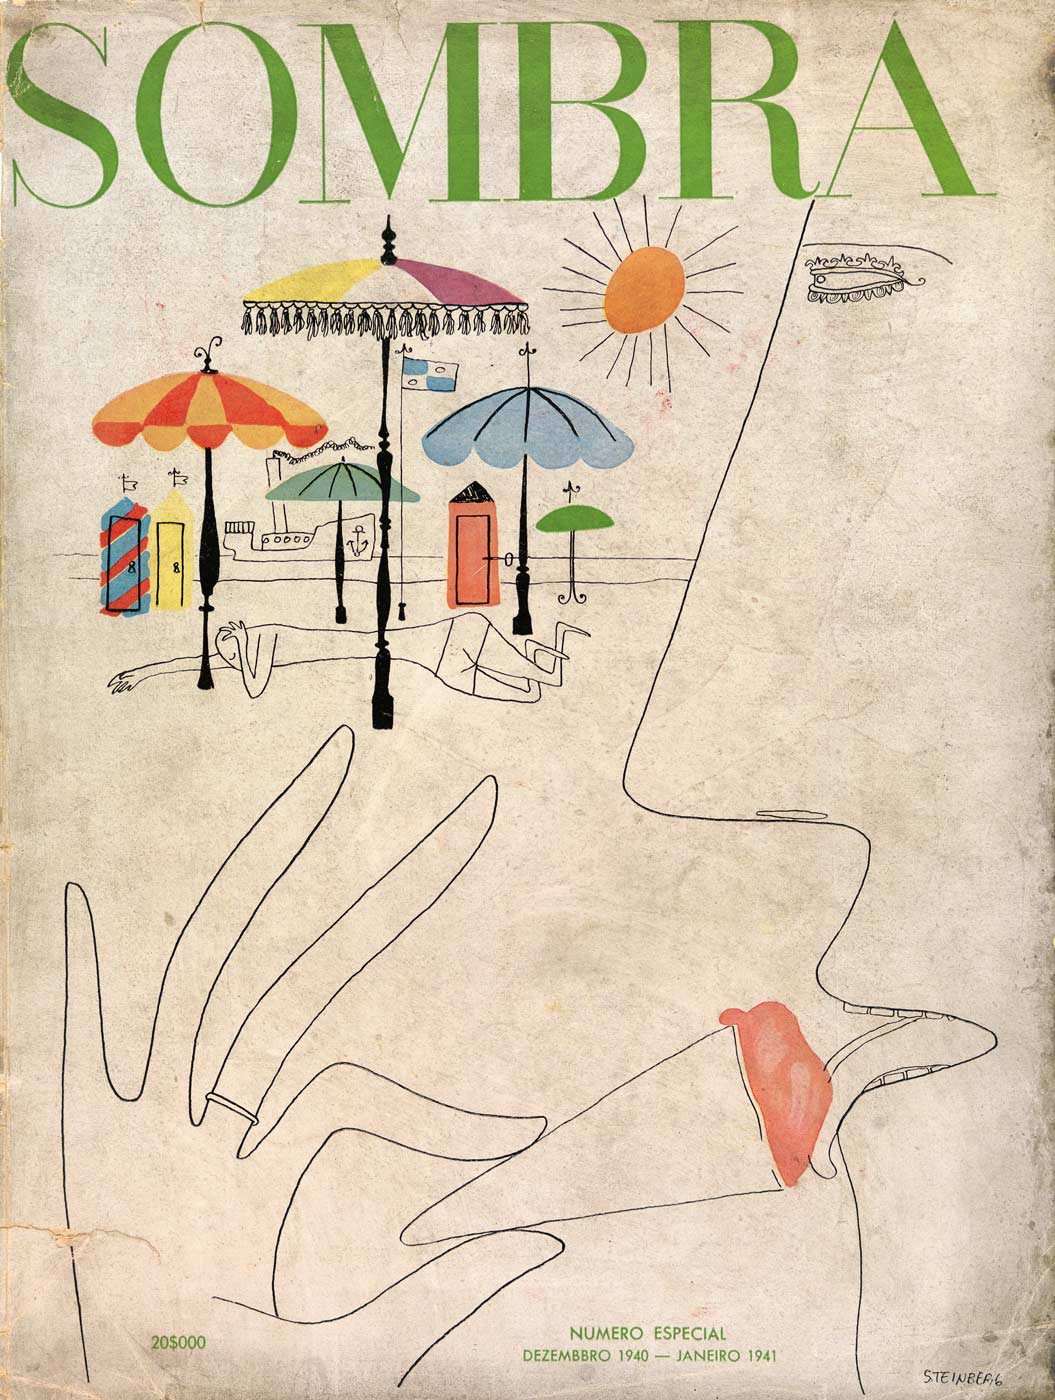 Cover and two inside drawings published in the Brazilian magazine Sombra (December 1940-January 1941).